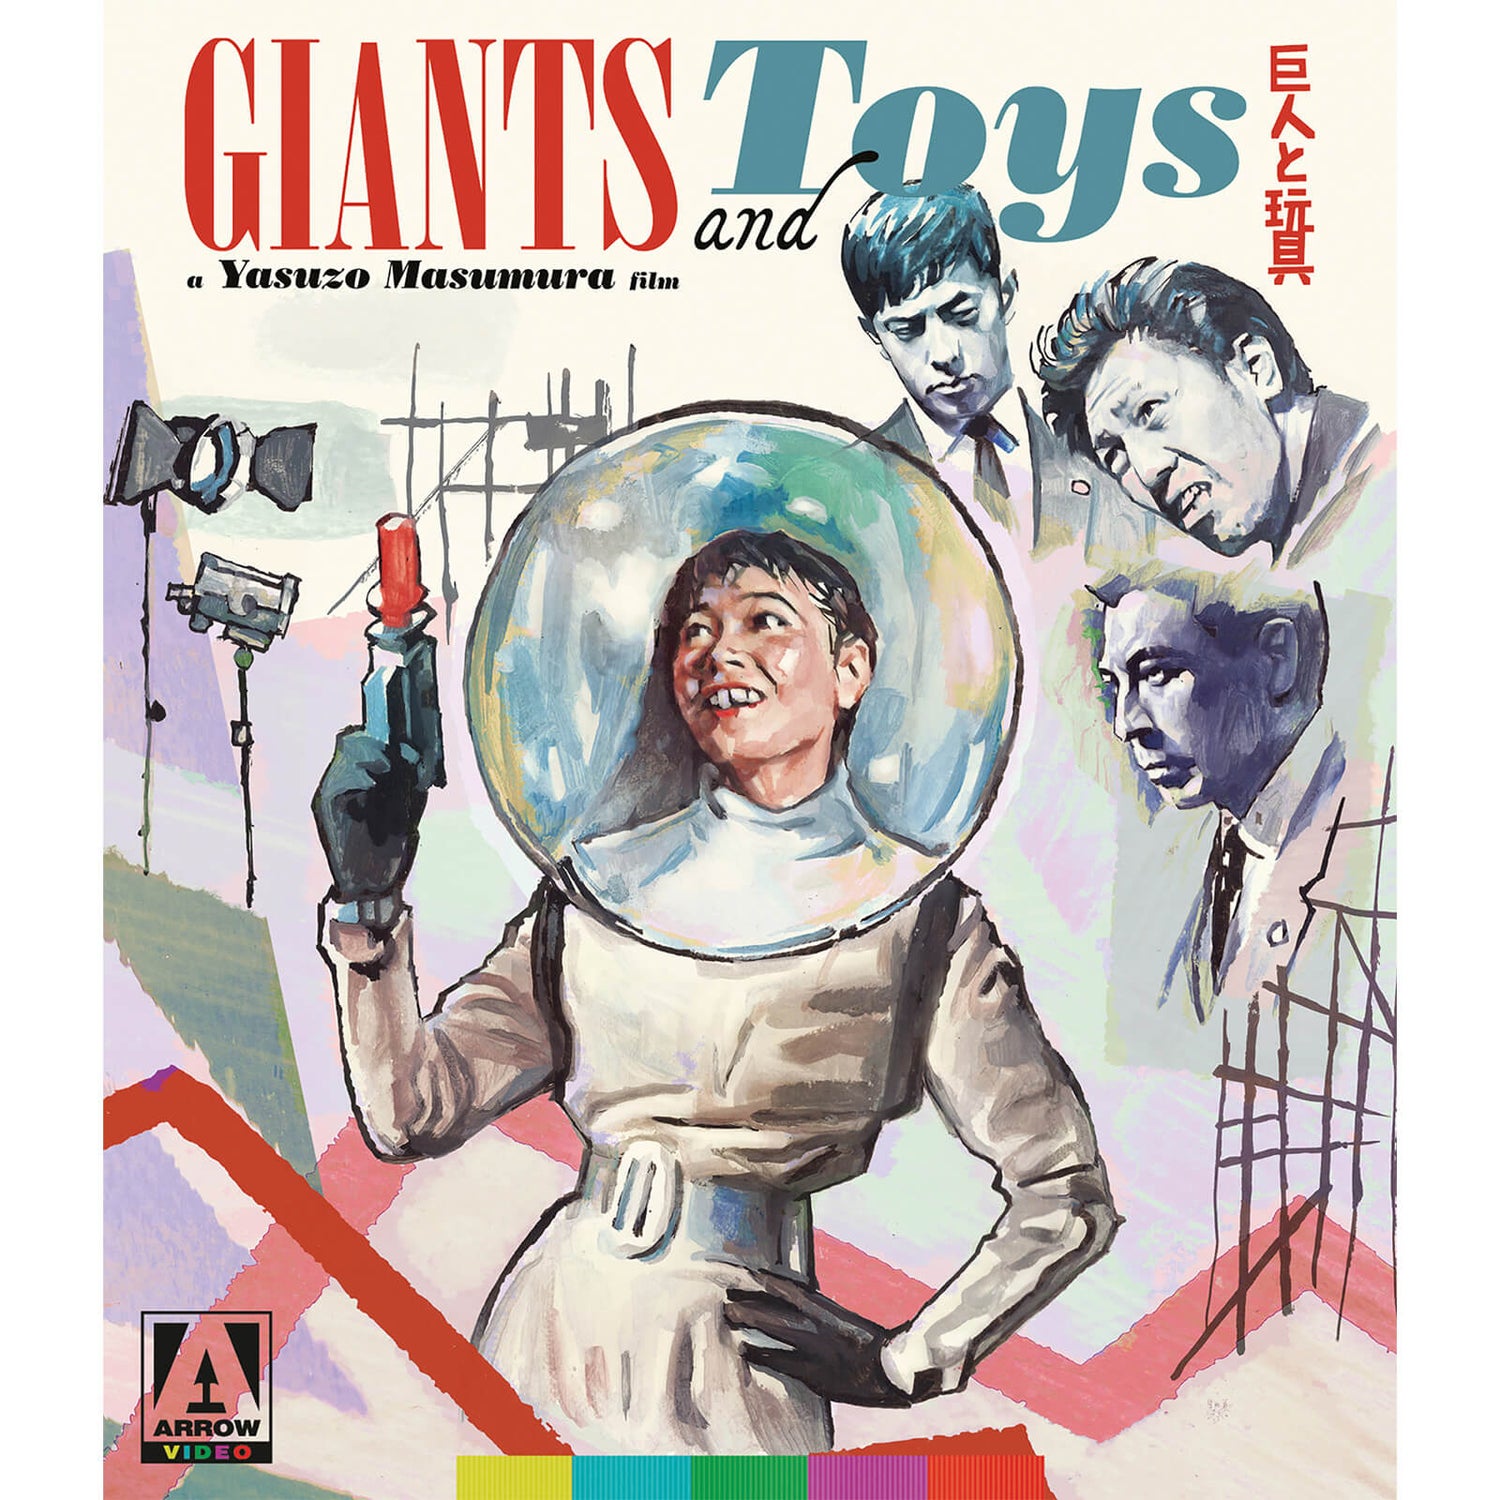 Giants And Toys Blu-ray